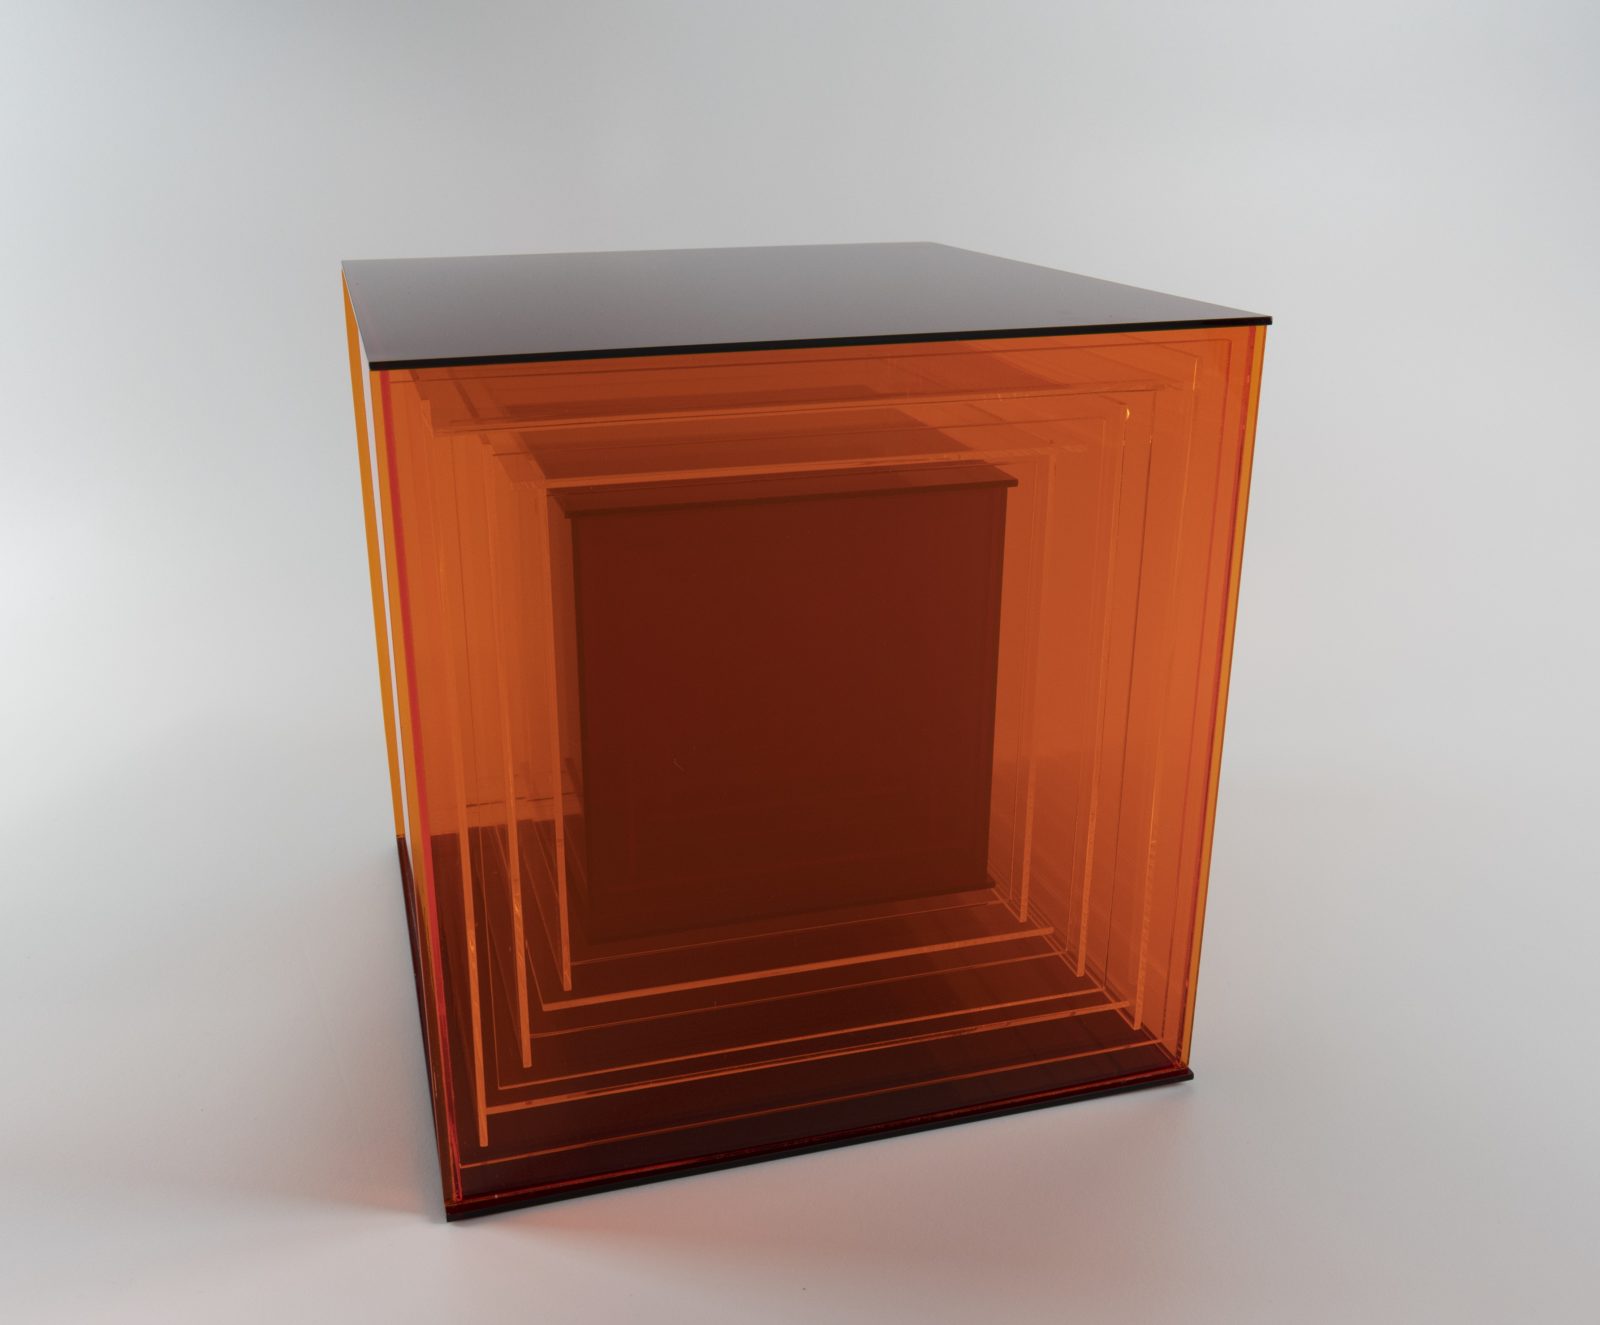 A sculpture of orange and red Plexiglas panels on a grey background.